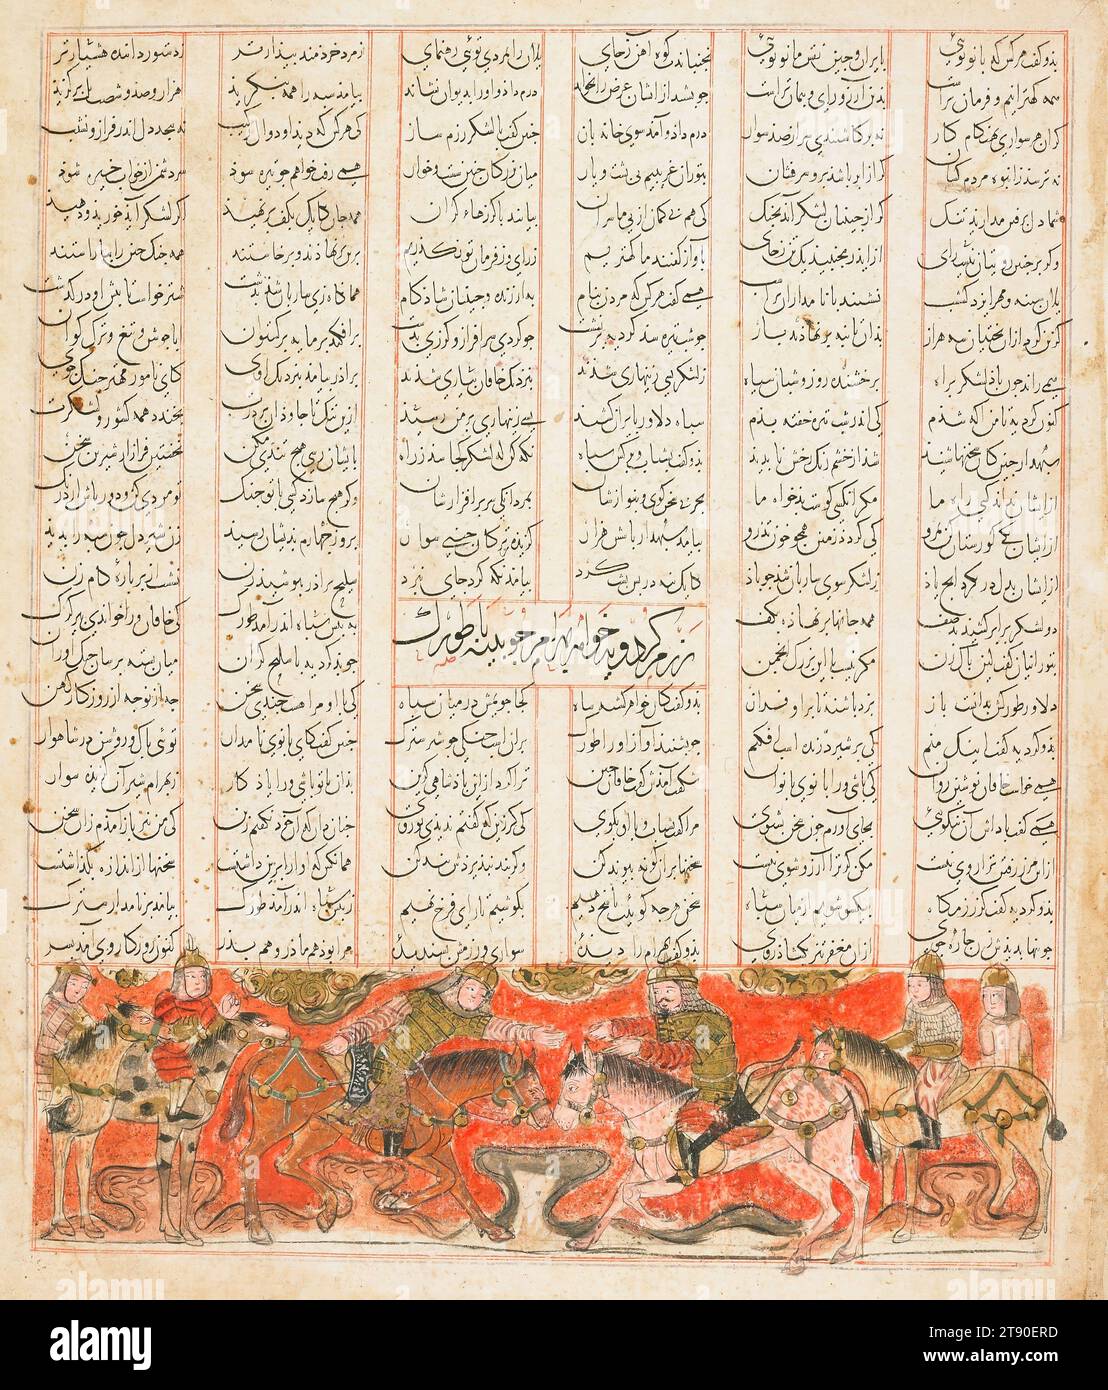 Gordiya Parleys with Tuwurg, 1341, Hasan ibn Muhammad ibn `Ali ibn Husaini (known as al-Mausili), 13 x 8 1/8 in. (33.02 x 20.64 cm) (sheet), Ink, colors, and gold on paper, Iran, 14th century, This page, from the same Shahnameh manuscript as the work on the left, shifts the image to the bottom of the six-columned text, demonstrating the variety and visual rhythm of the complete manuscript. The scene depicts the influential Iranian noblewoman Gordiya, seen on horseback on the left. Her late brother Bahram had attempted to seize the throne from the Sasanian emperor Khosrow II Stock Photo